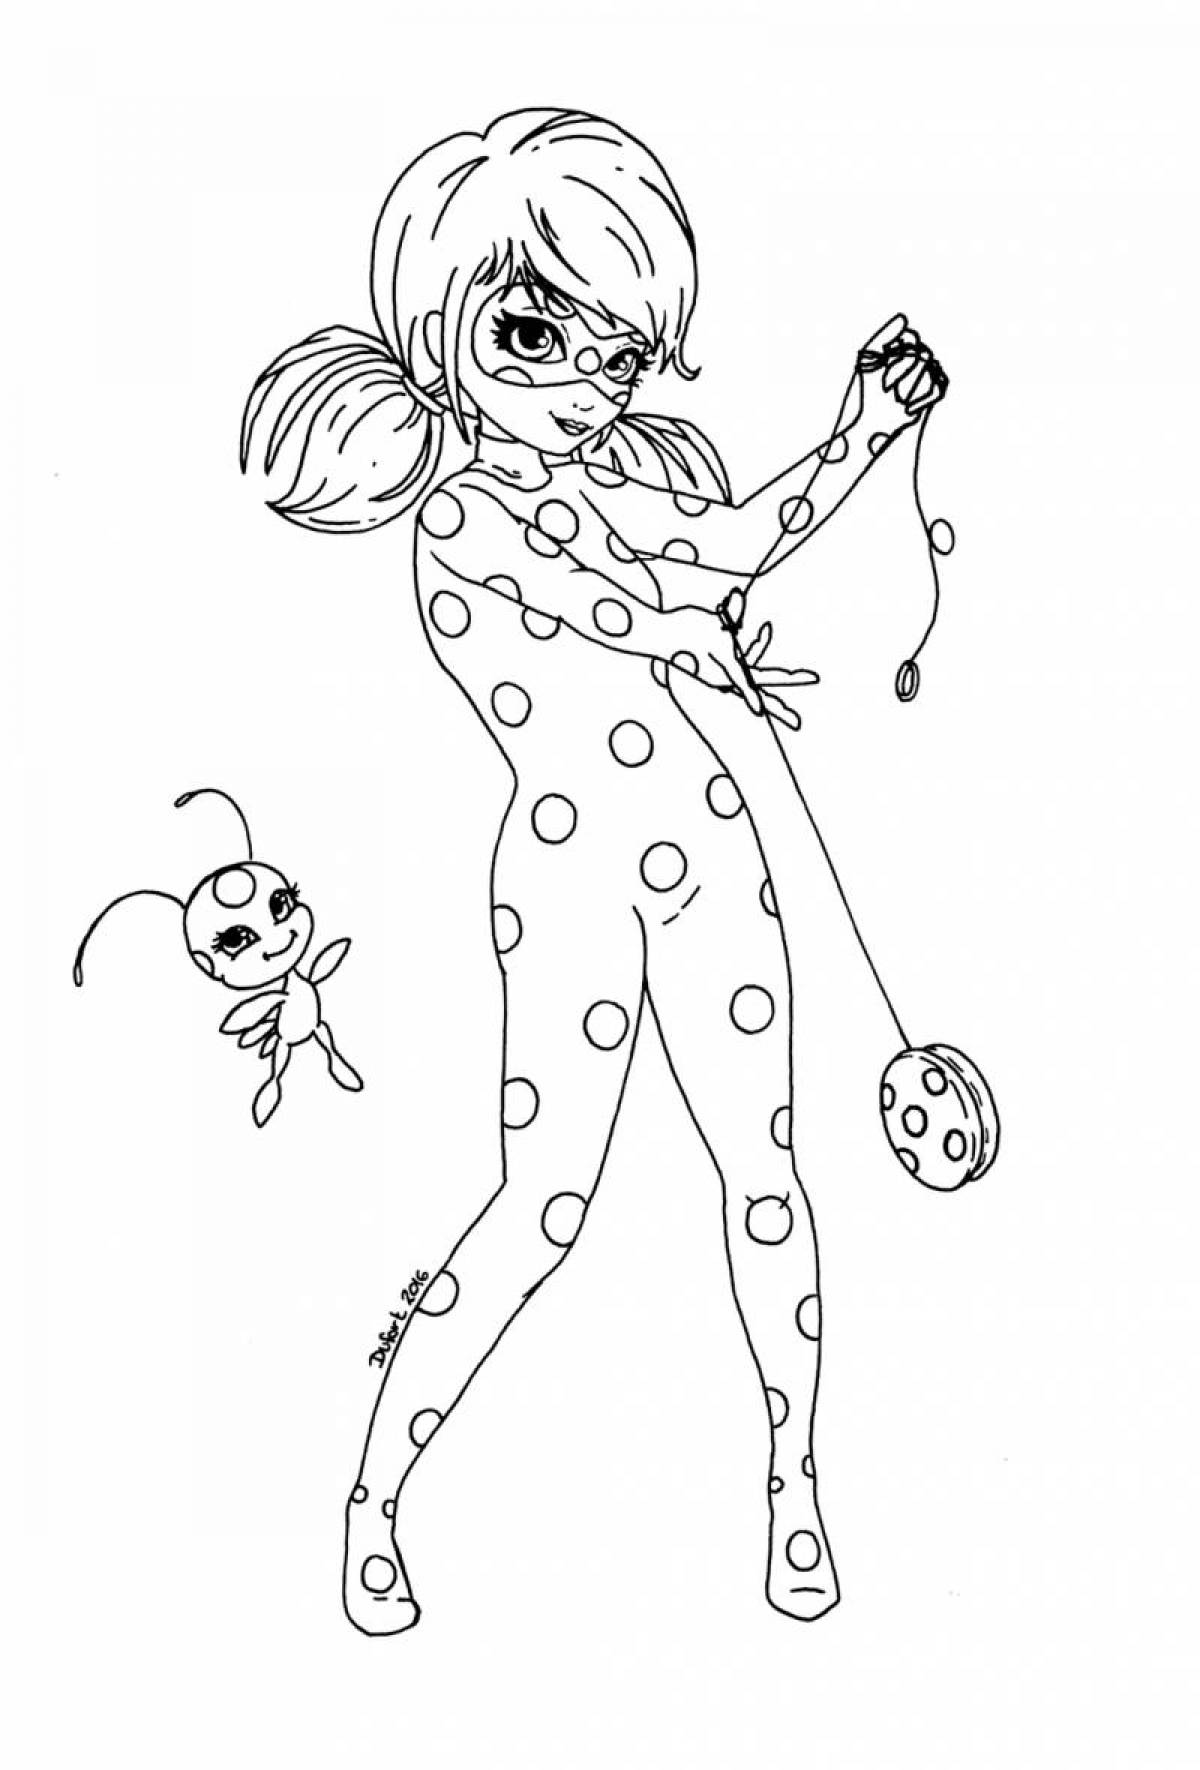 Live ladybug and super cat coloring pages for kids